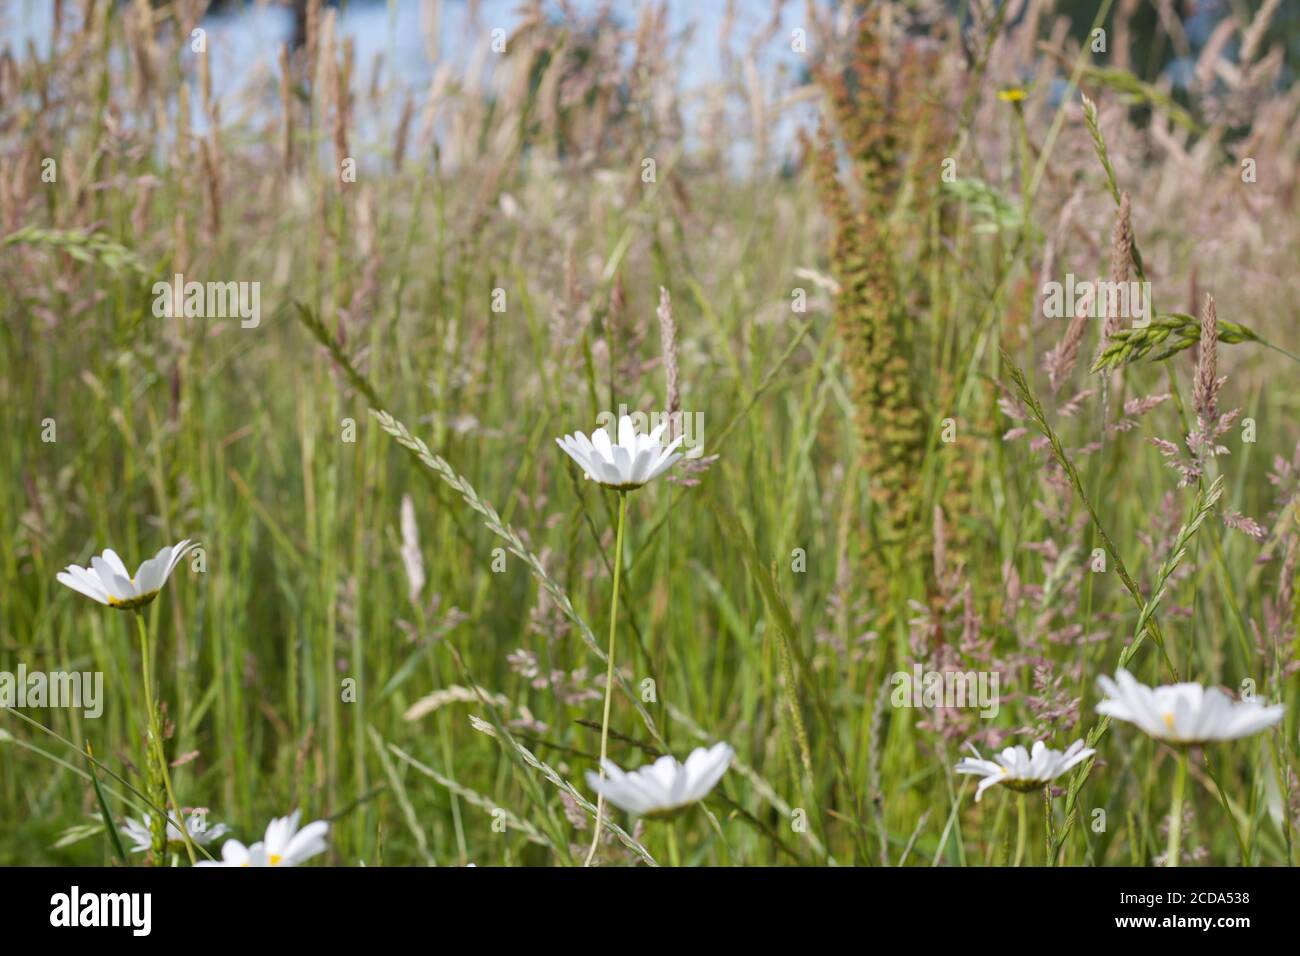 Simple white daisies in wildflower field showing dried grassy summer foliage Stock Photo